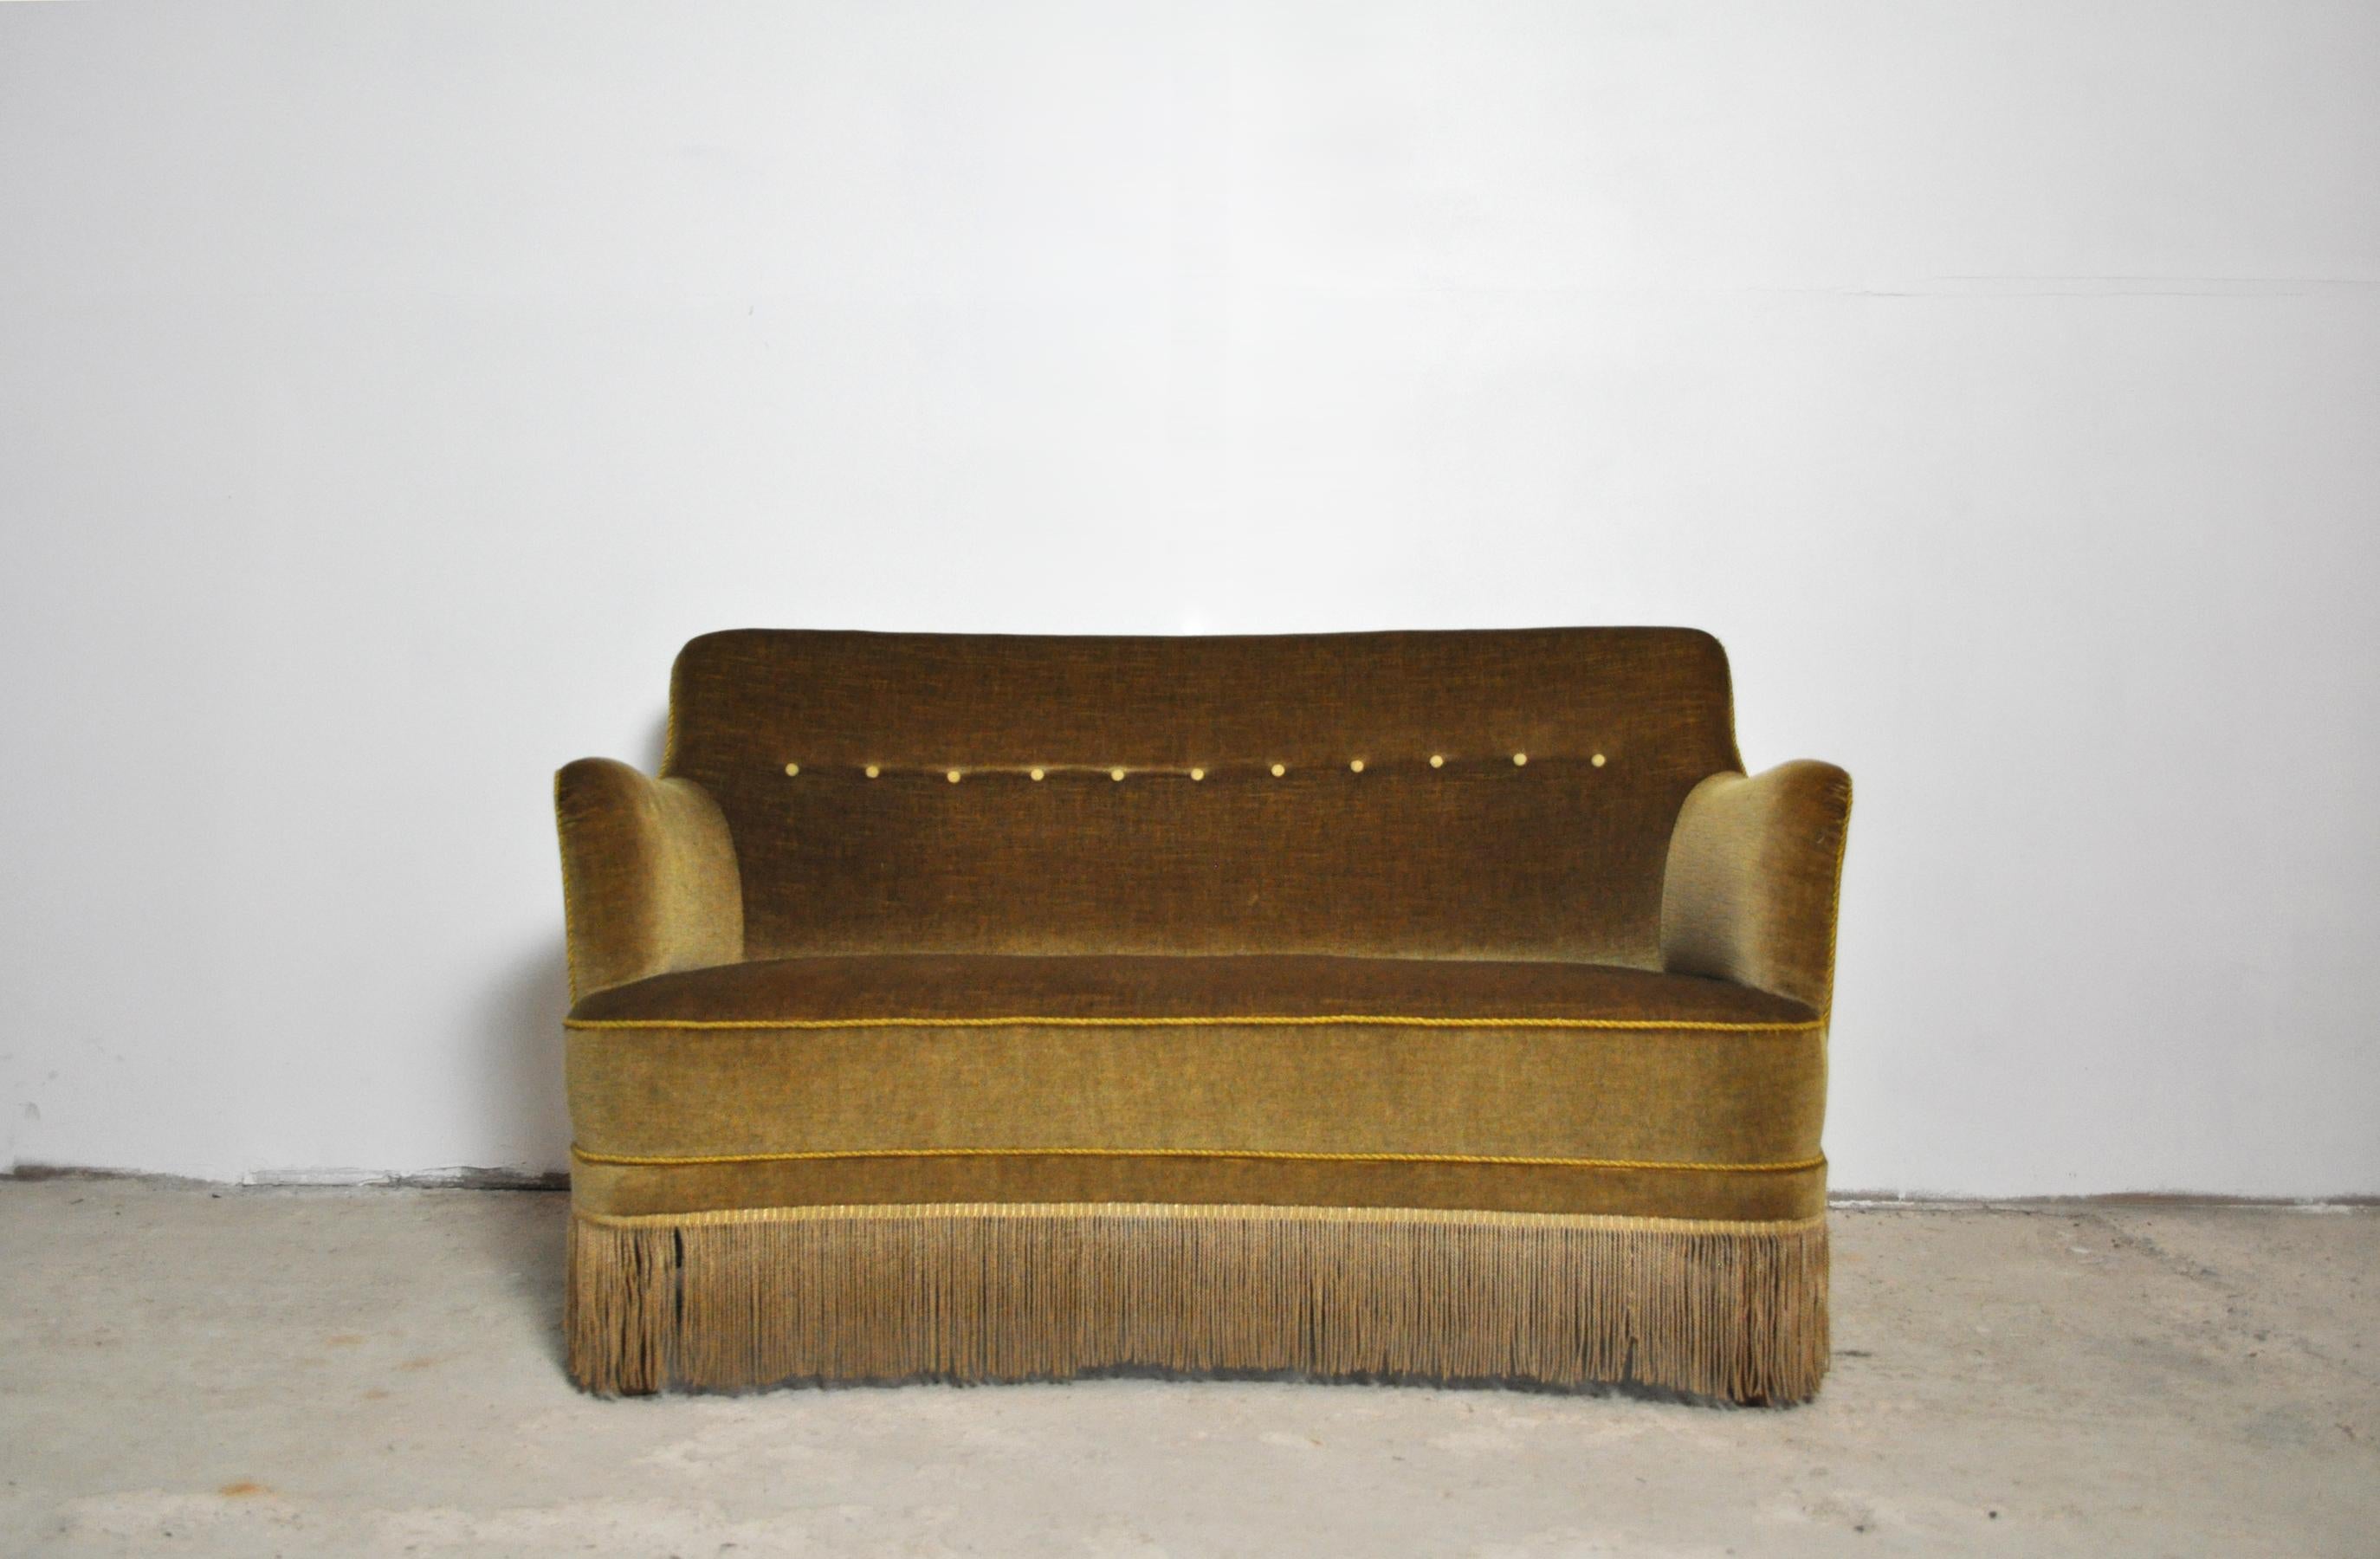 Scandinavian curved early 20th century sofa. The original upholstery in green and yellow tones is in a very good condition.

Dimensions:
Height 78 cm
Length 135 cm
Depth 80 cm
Seat height 43 cm.